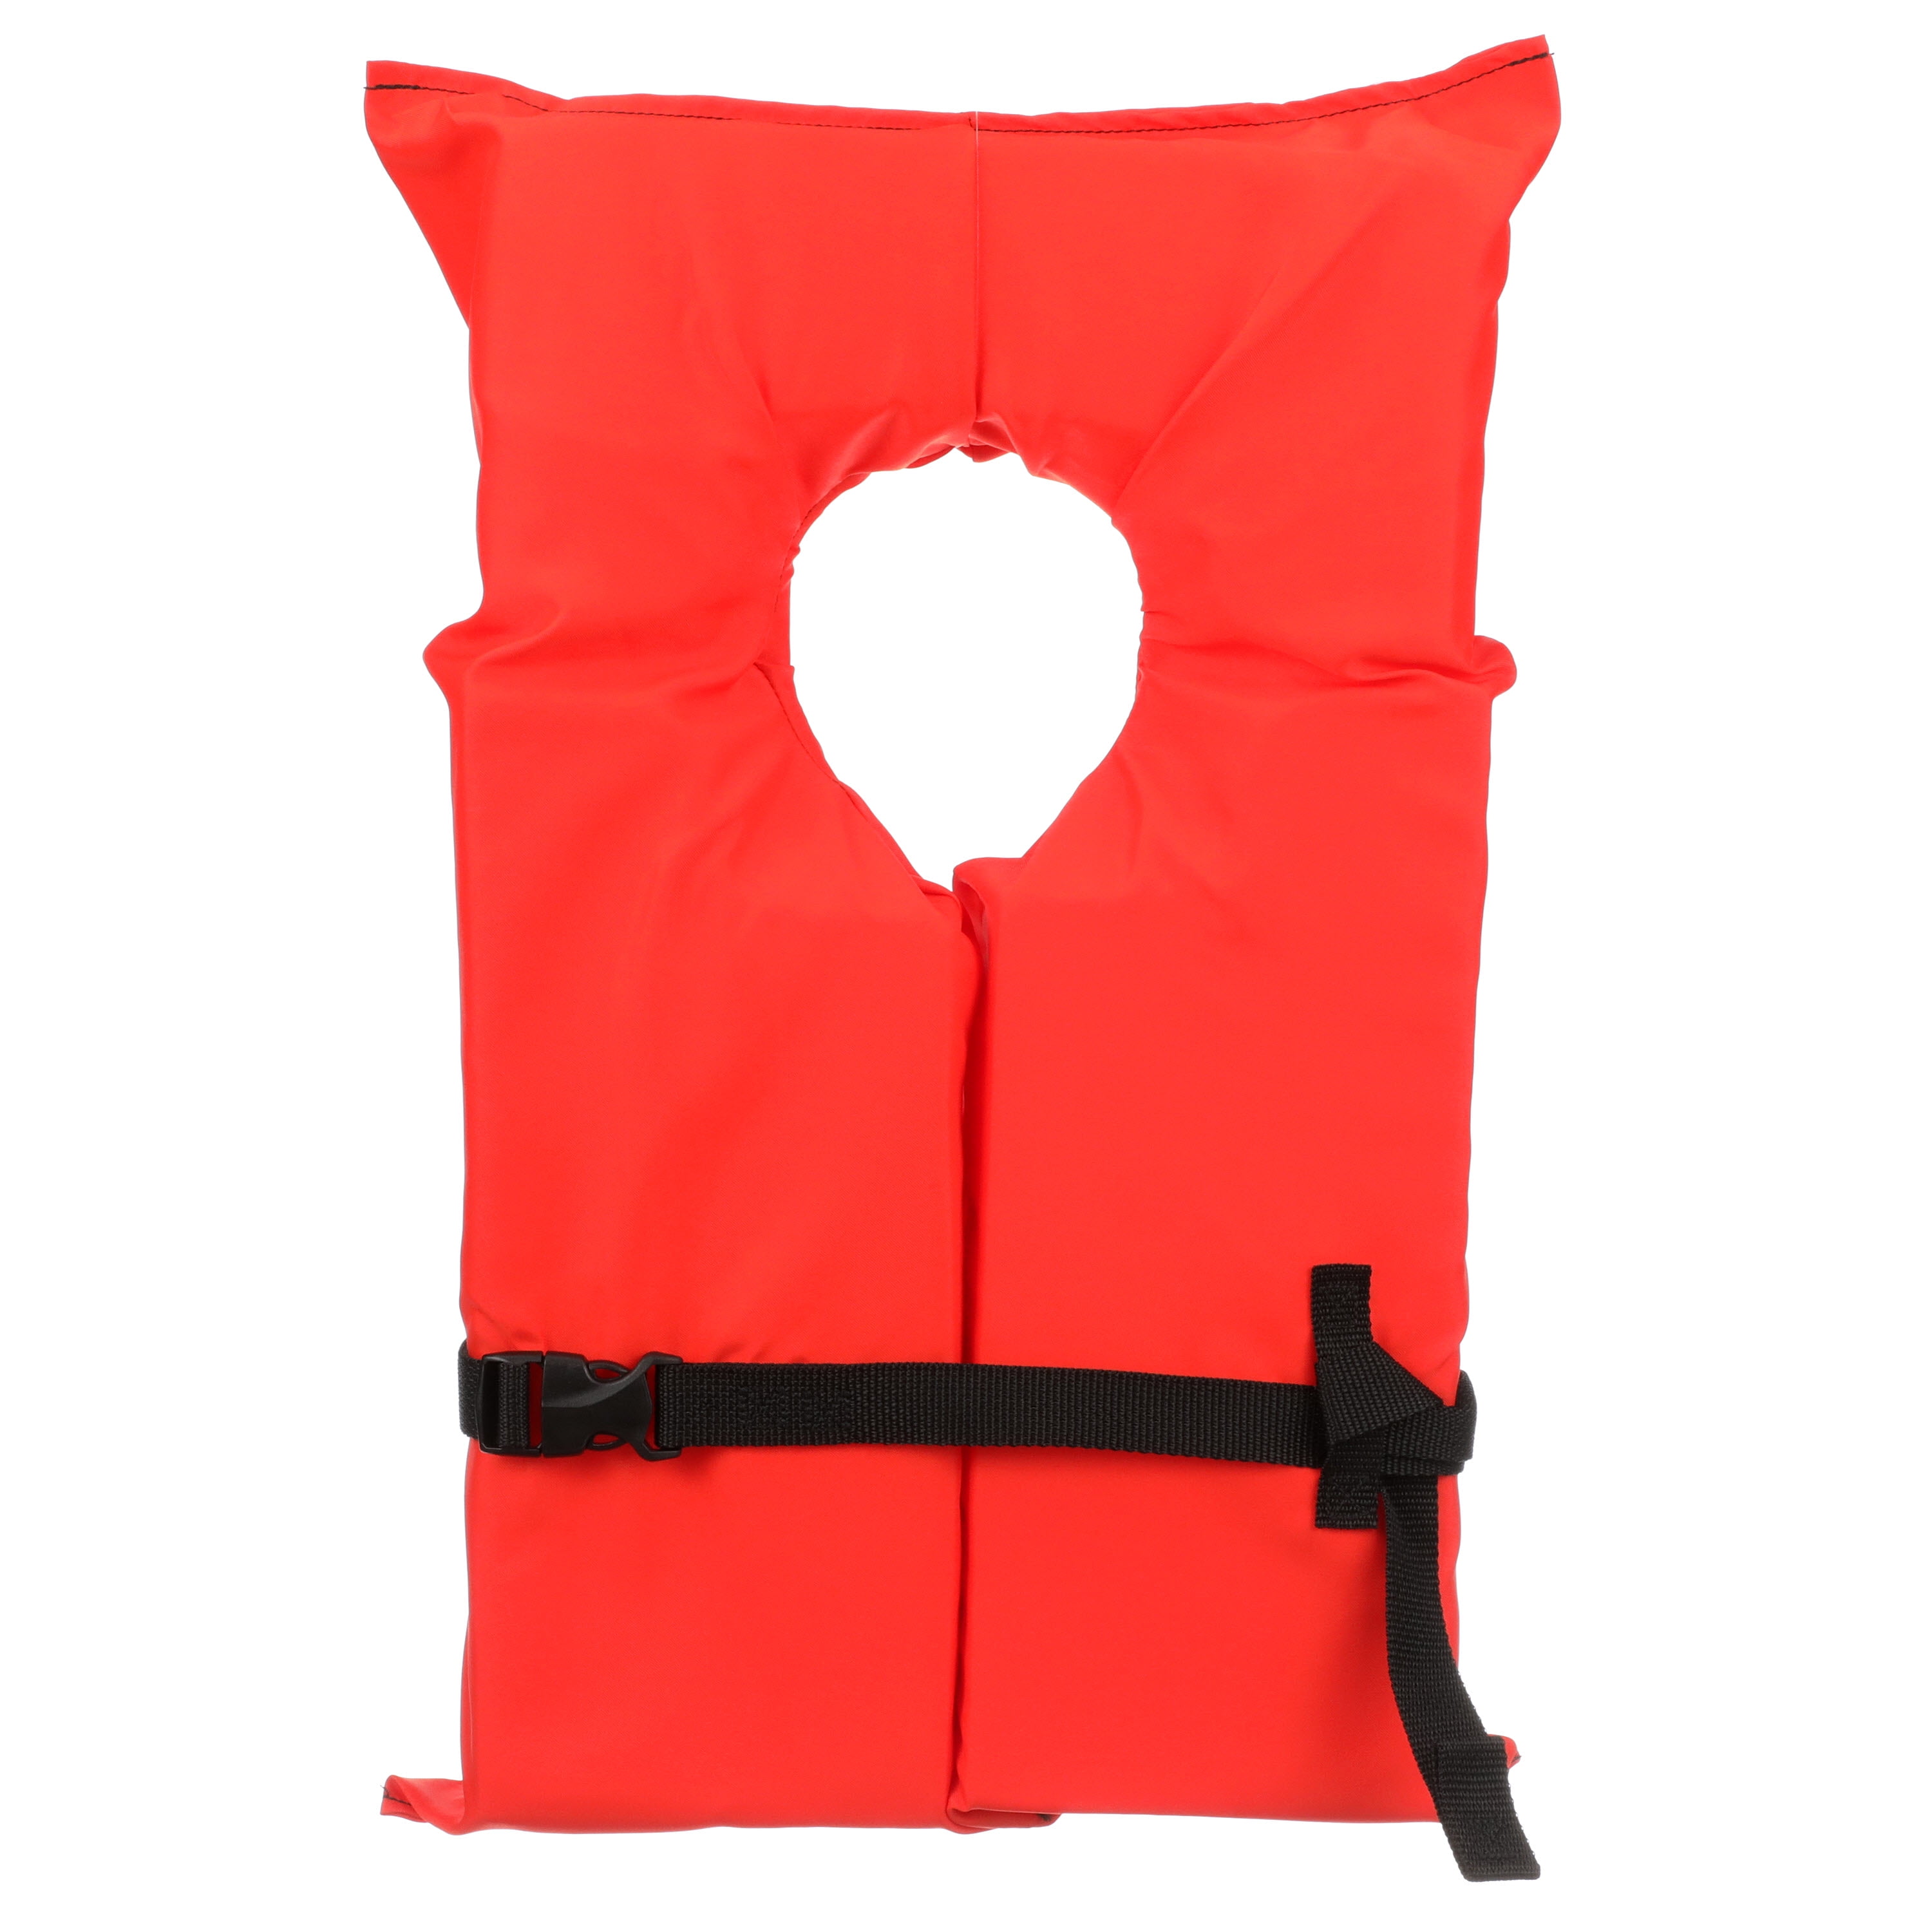 Details about   Kent Coast Guard Approved Adult Type II Buoyant Life Vest New Lot Of 2 Vests 